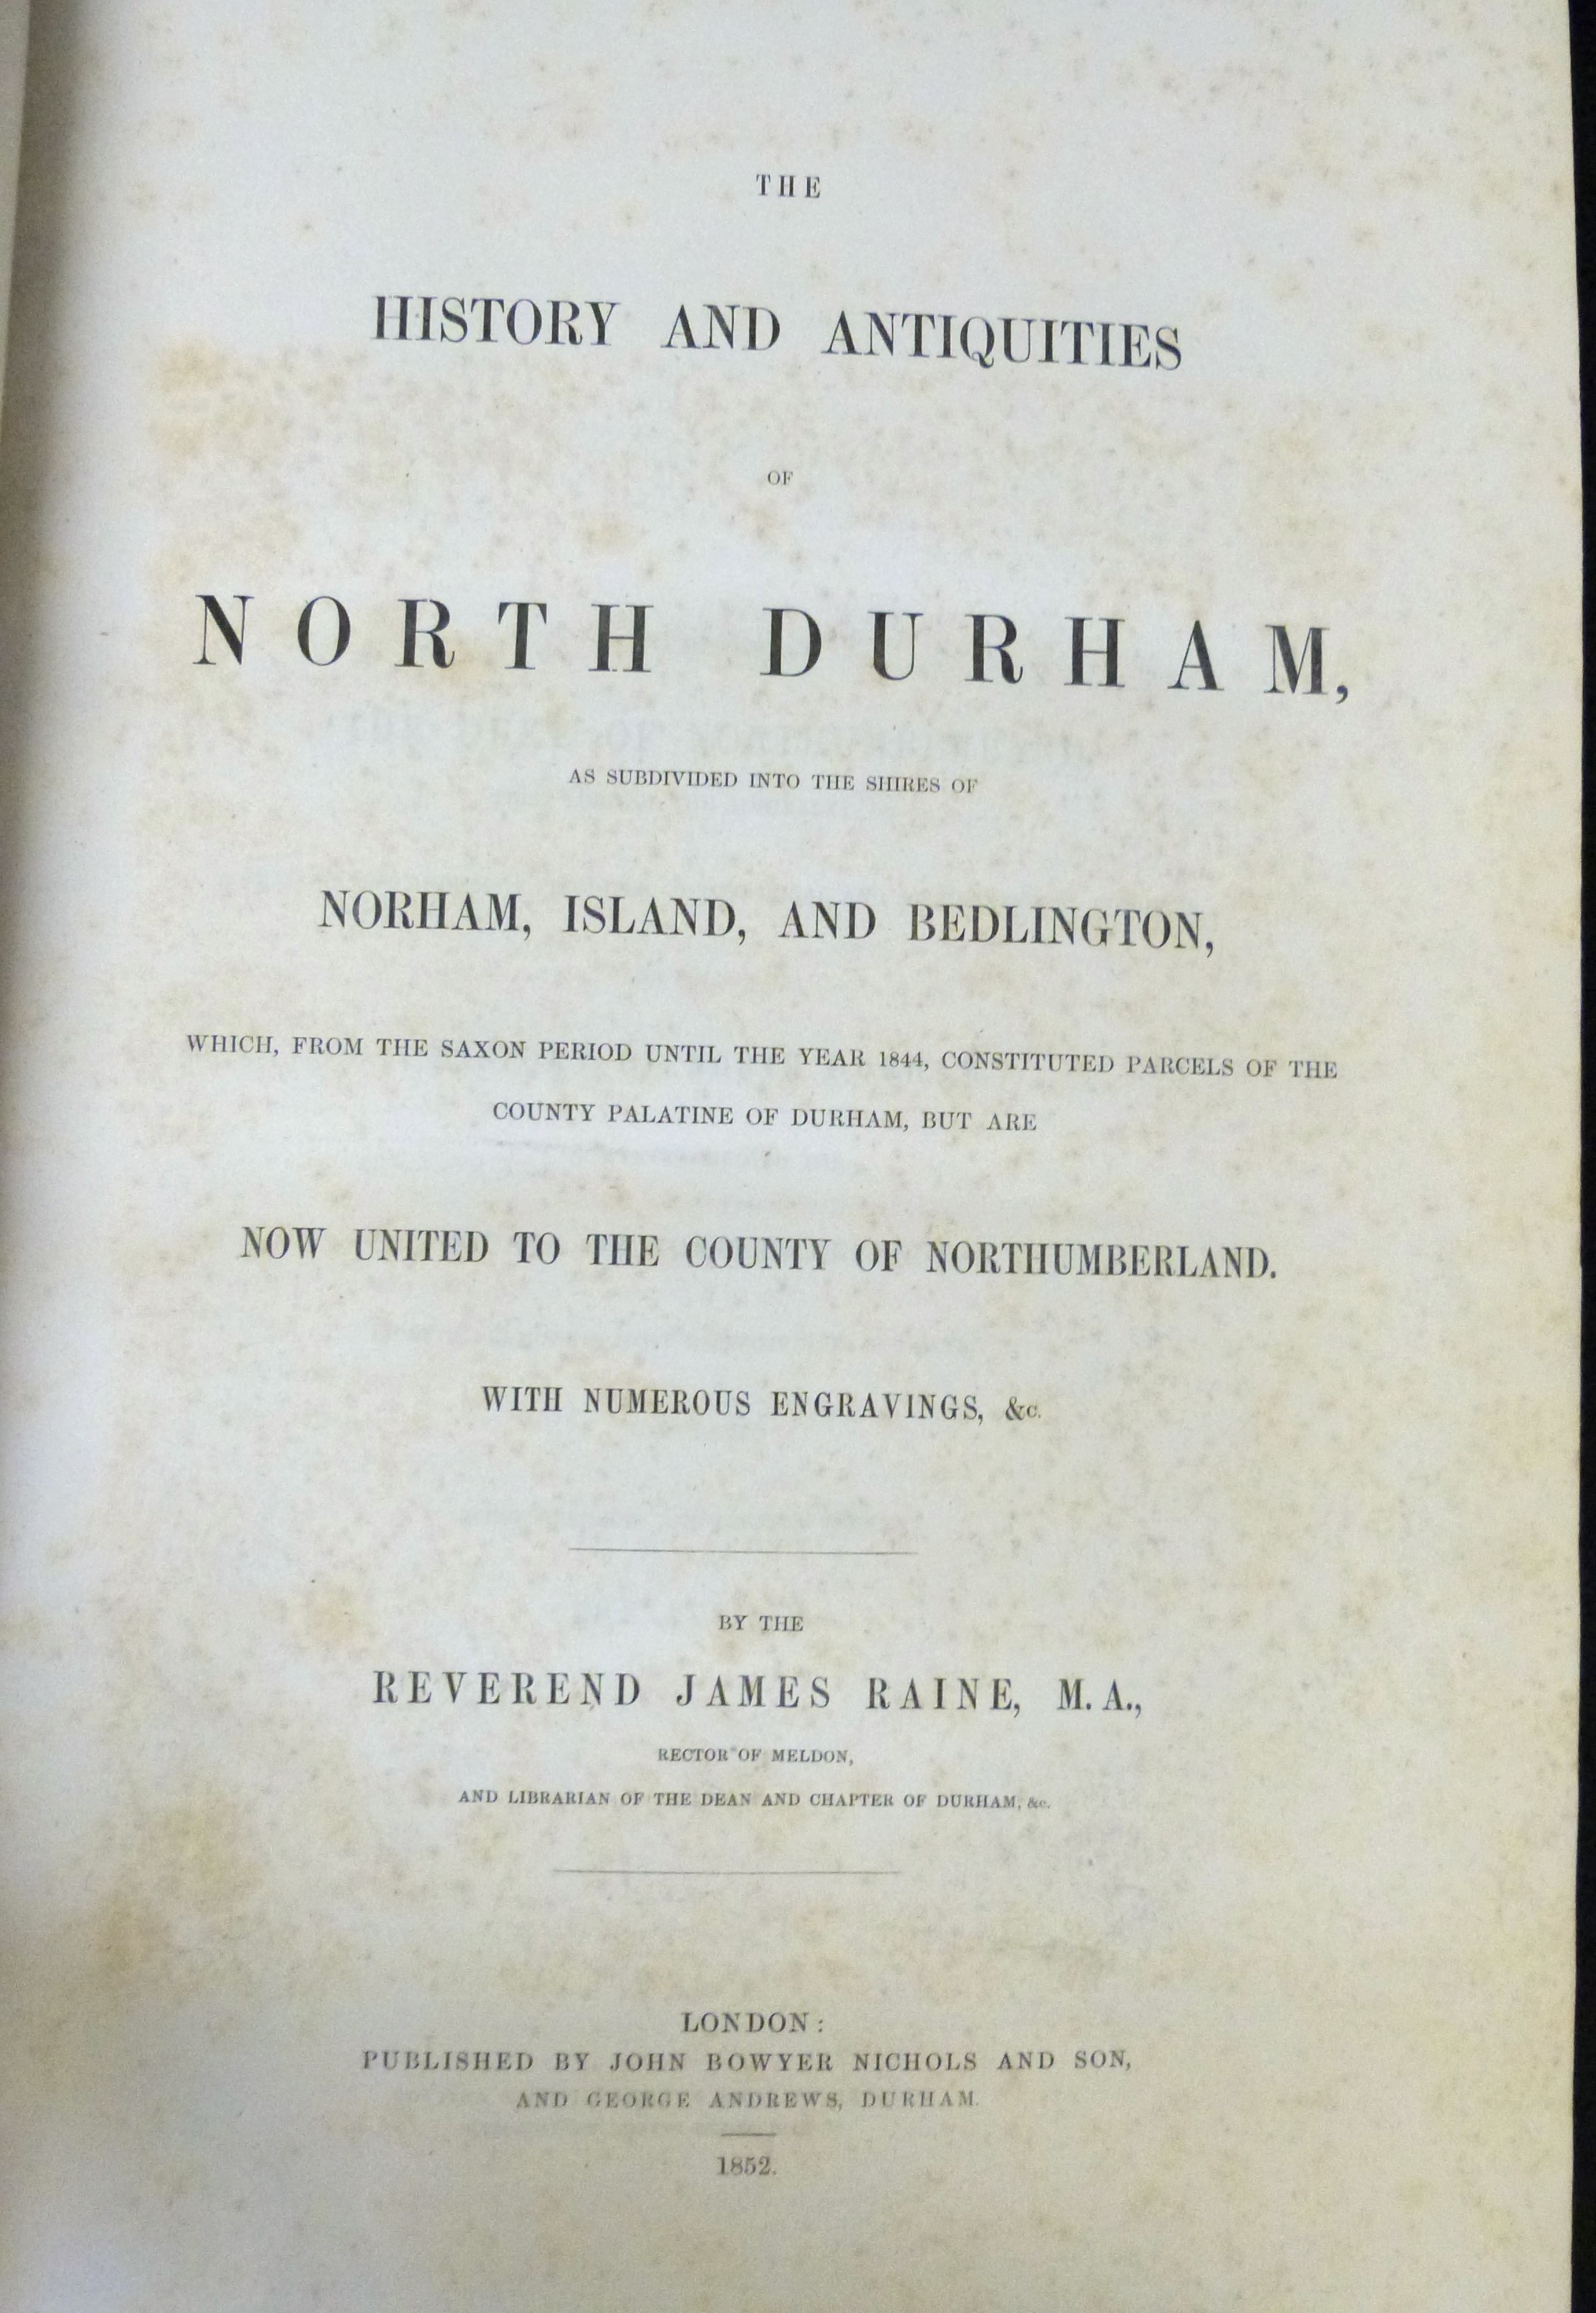 ROBERT SURTEES: THE HISTORY AND ANTIQUITIES OF THE COUNTY PALATINE OF DURHAM..., London, 1816-40, - Image 2 of 5